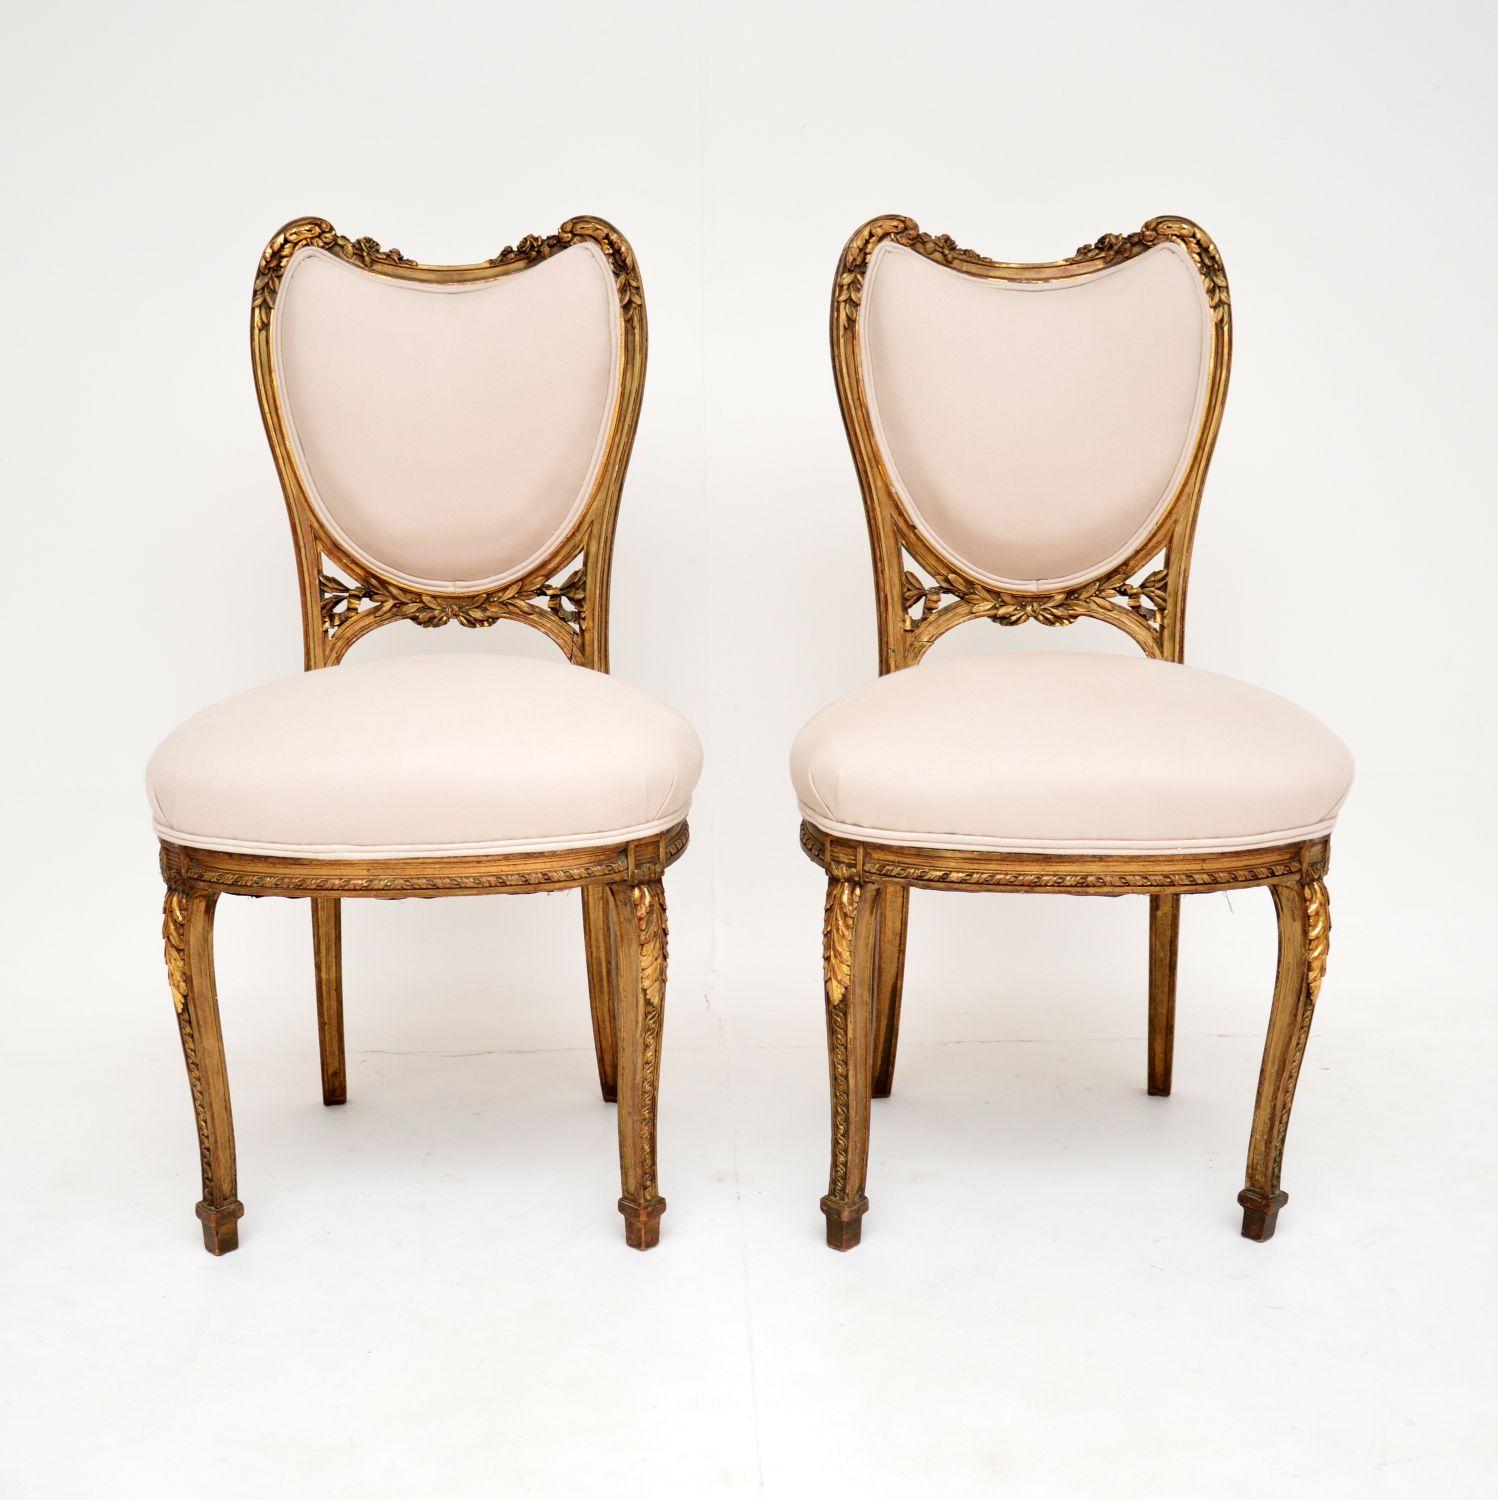 A stunning pair of original antique French carved gilt wood side chairs, dating from around the 1890-1900 period.

The quality is superb, they are beautifully made and have a gorgeous design. The backs have an interesting heart shape, there is